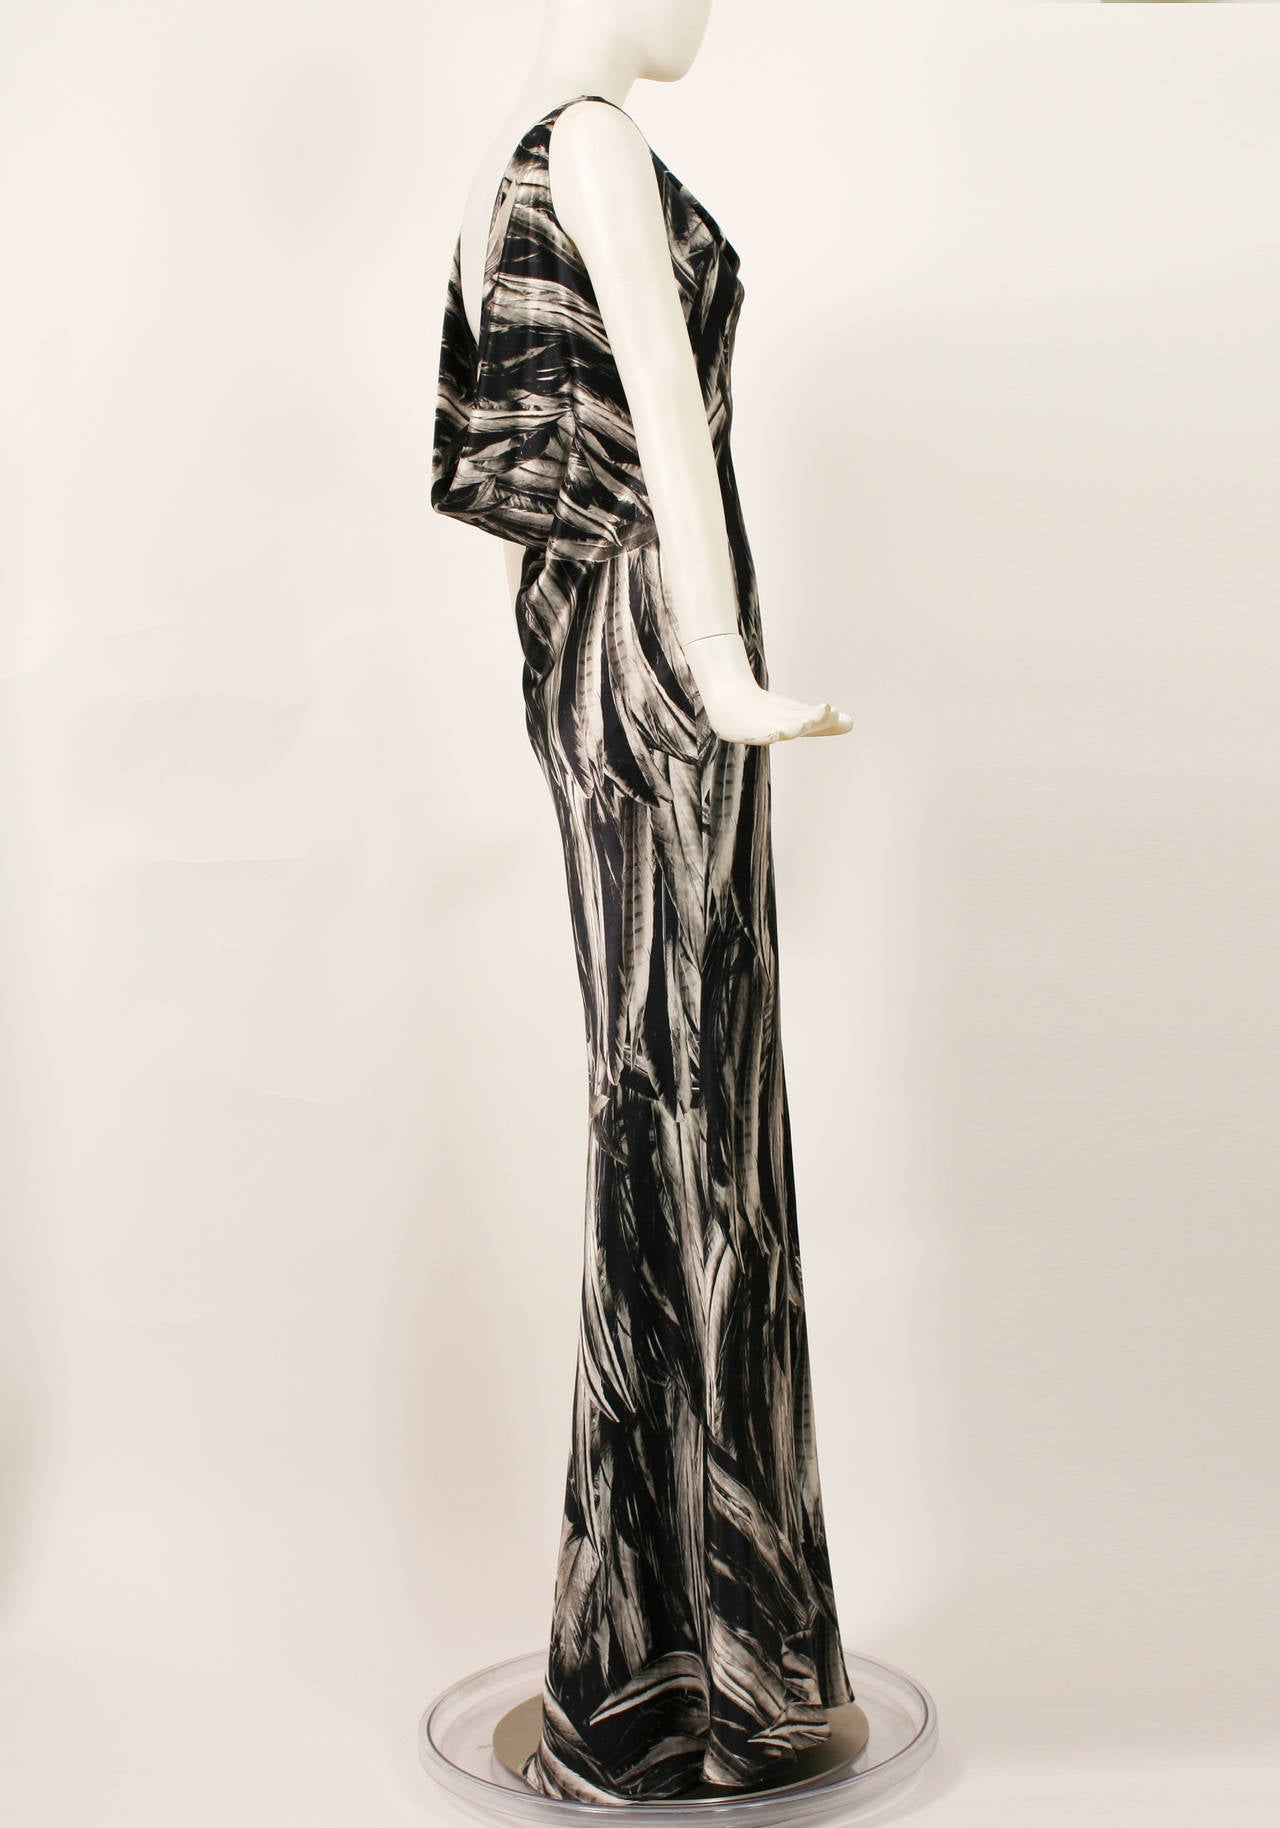 Alexander McQueen s/s 2009 Feather Print Silk Gown
A  magnificent dress with masterful draping. Bias cut with soft cowl at the front and a deeper plunge at the back. Feather print motif throughout. Excellent condition. Lined in black silk. Perfect